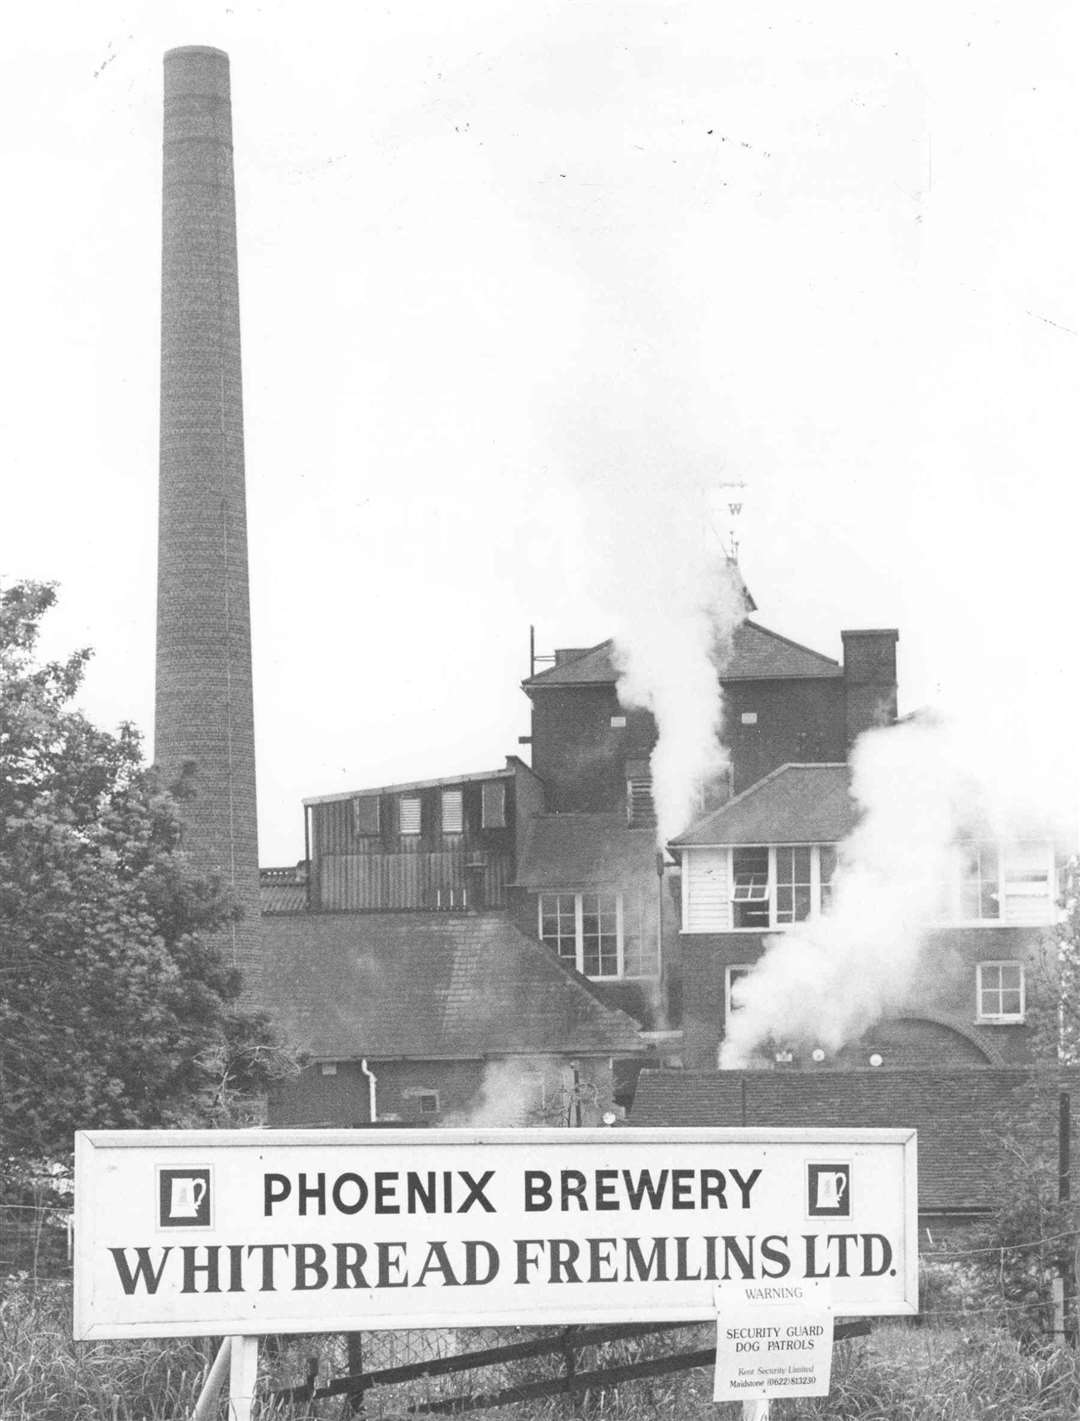 The Phoenix Brewery in Wateringbury after its acquisition by Whitbread and Fremlins